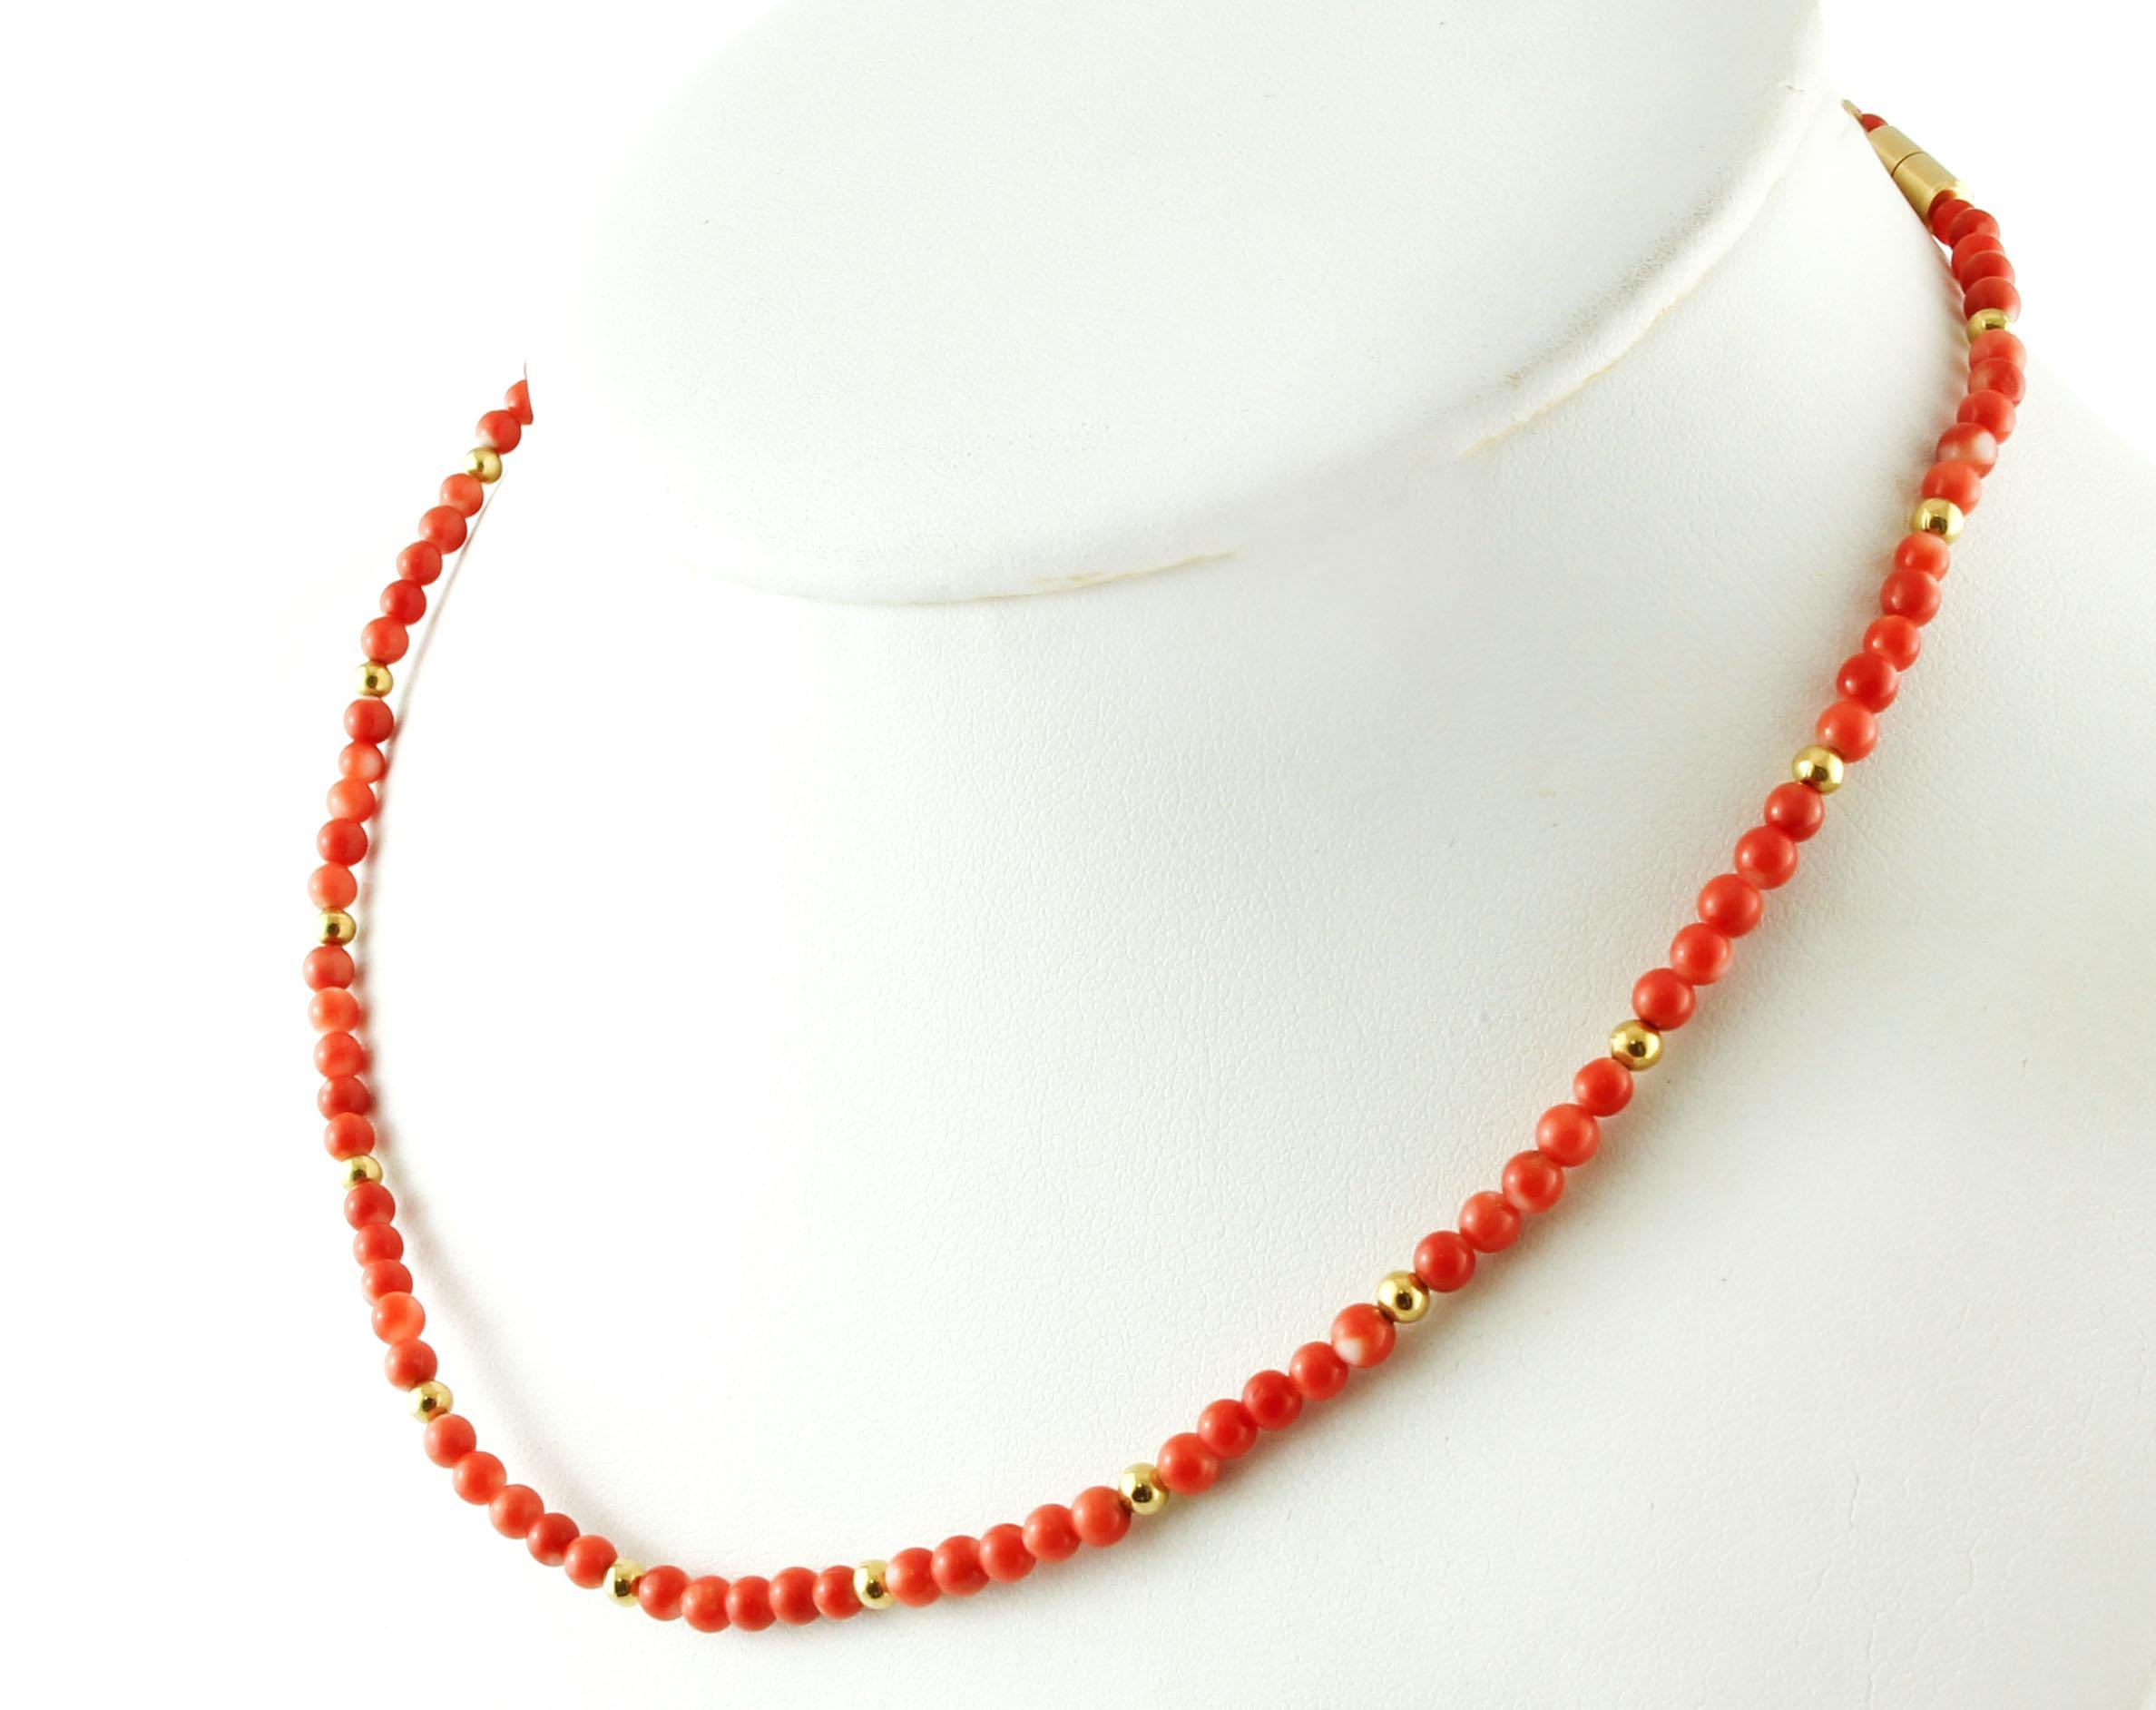 Lovely coral beaded necklace consisting of rubrum coral little spheres and 18k yellow gold spheres and closure. 
This necklace is totally handmade by Italian maste goldsmiths
Coral 5 g
Total weight 9.6 g
Length 40 cm
RF + HRC

For any enquires,